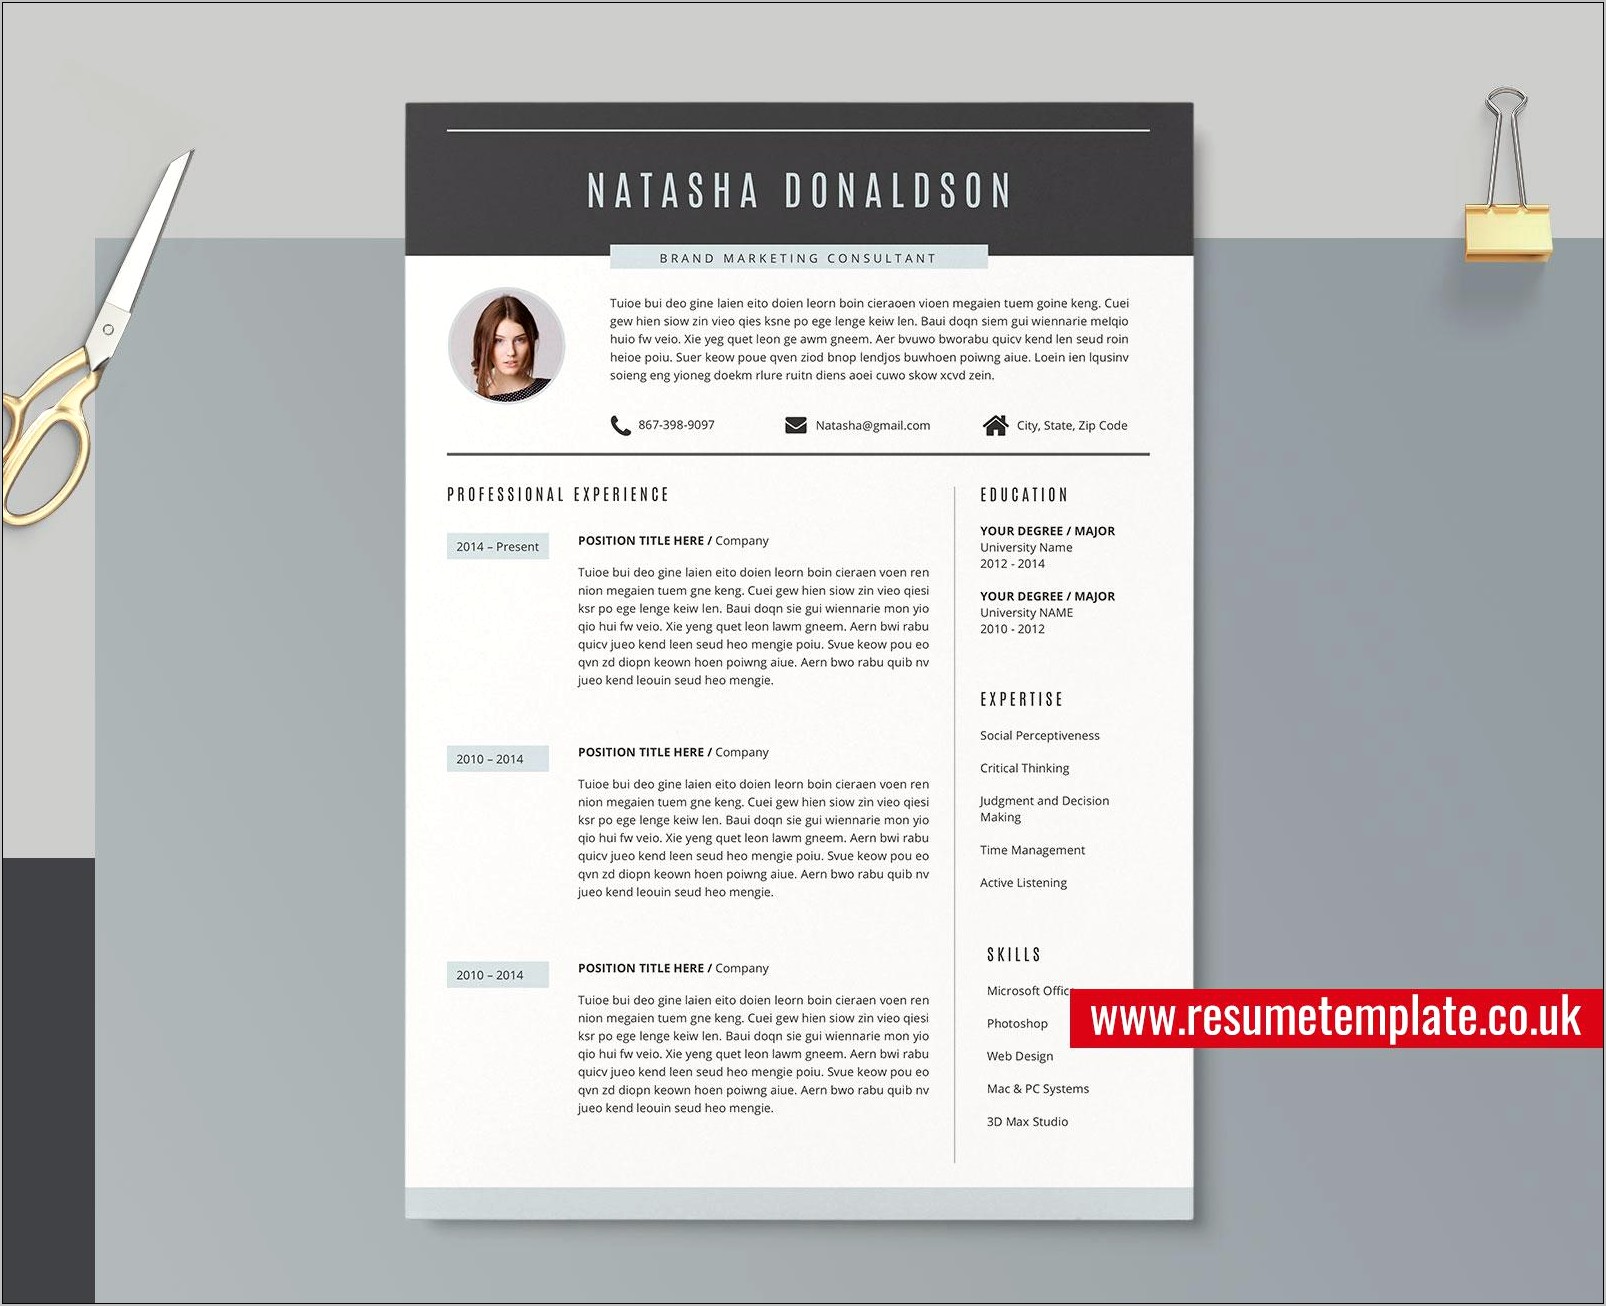 download-resume-template-for-microsoft-word-2010-resume-example-gallery